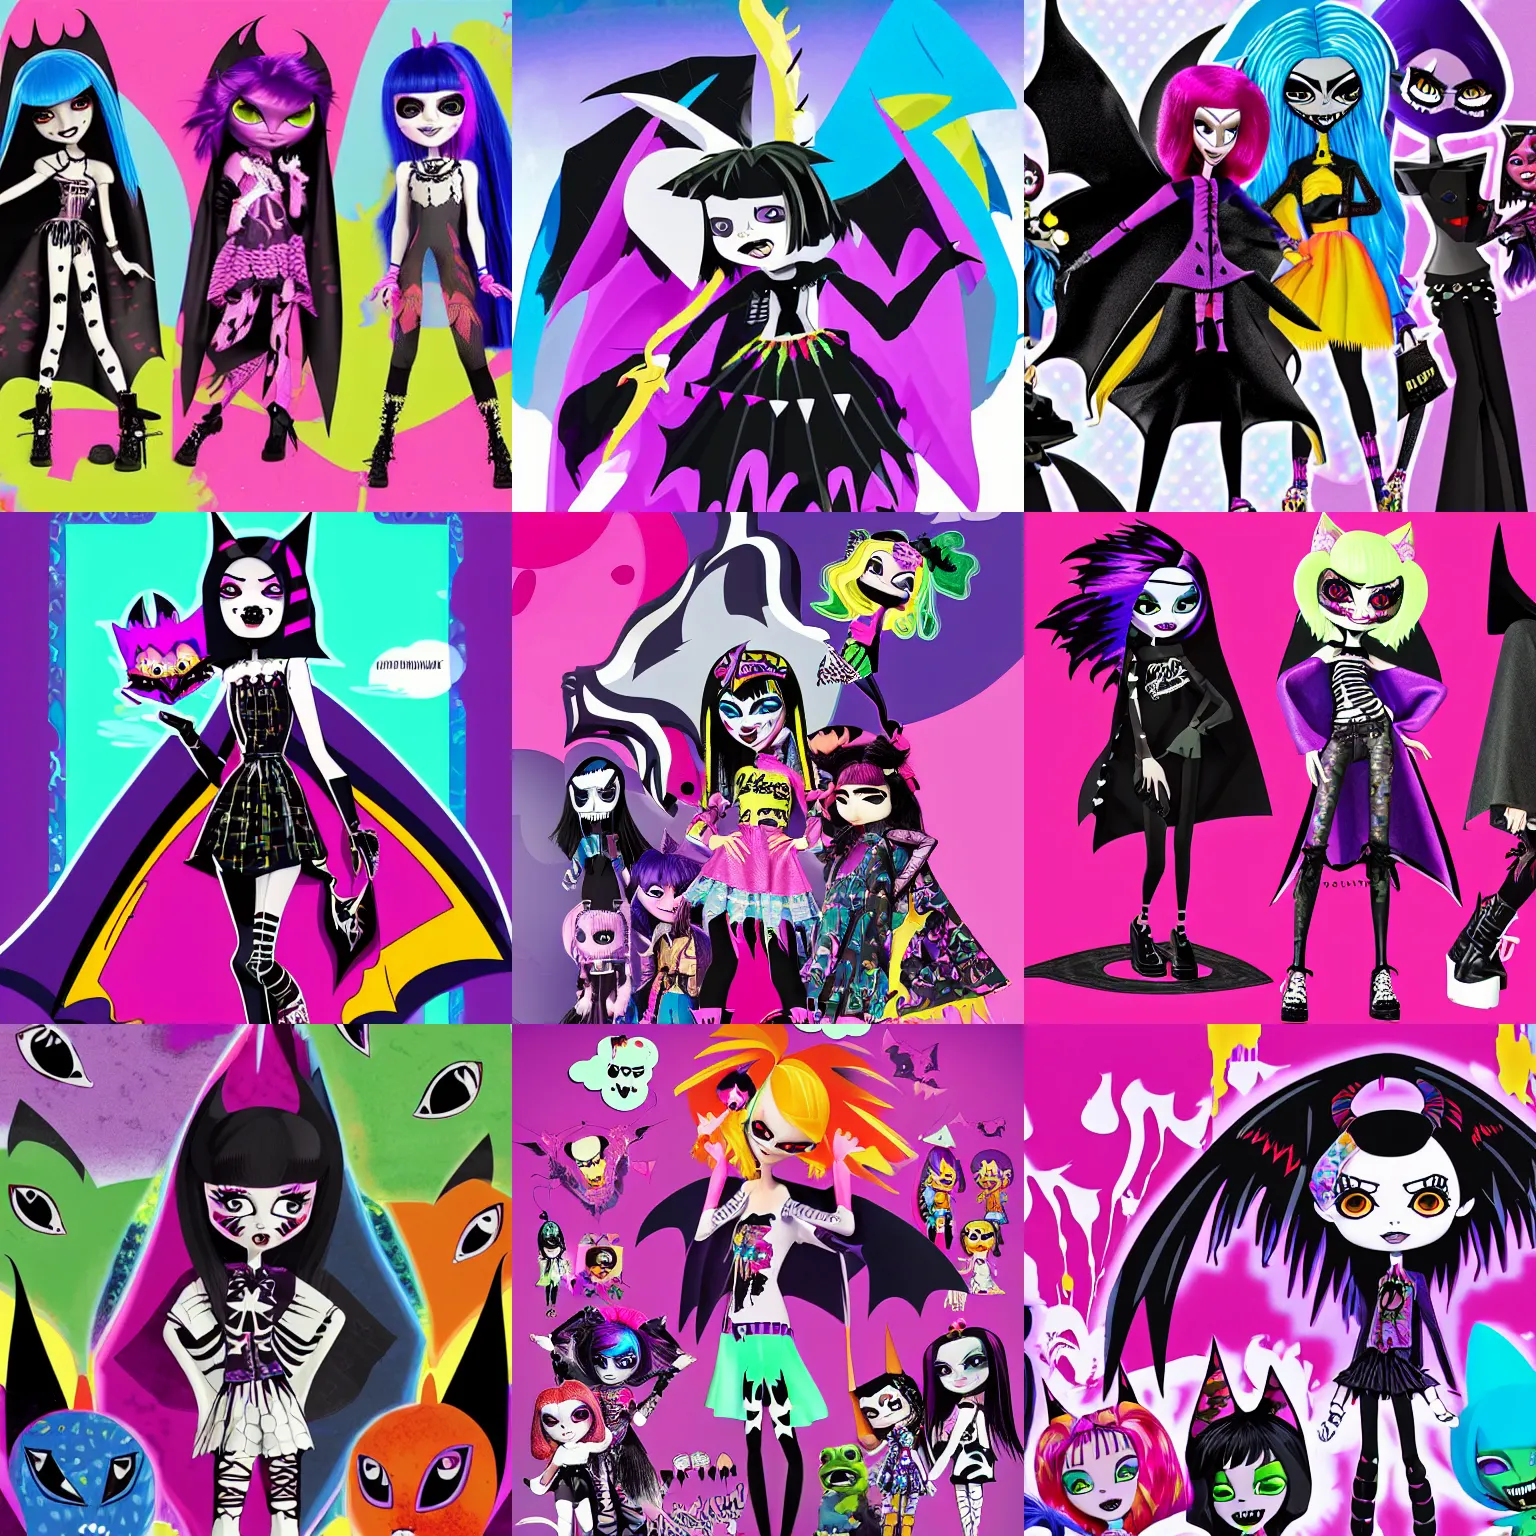 Prompt: lisa frank gothic emo punk vampiric rockstar vampire squid wearing a bat shaped poncho cape with platform shoes character designs of various shapes and sizes by genndy tartakovsky and monster high for the new hotel transylvania film